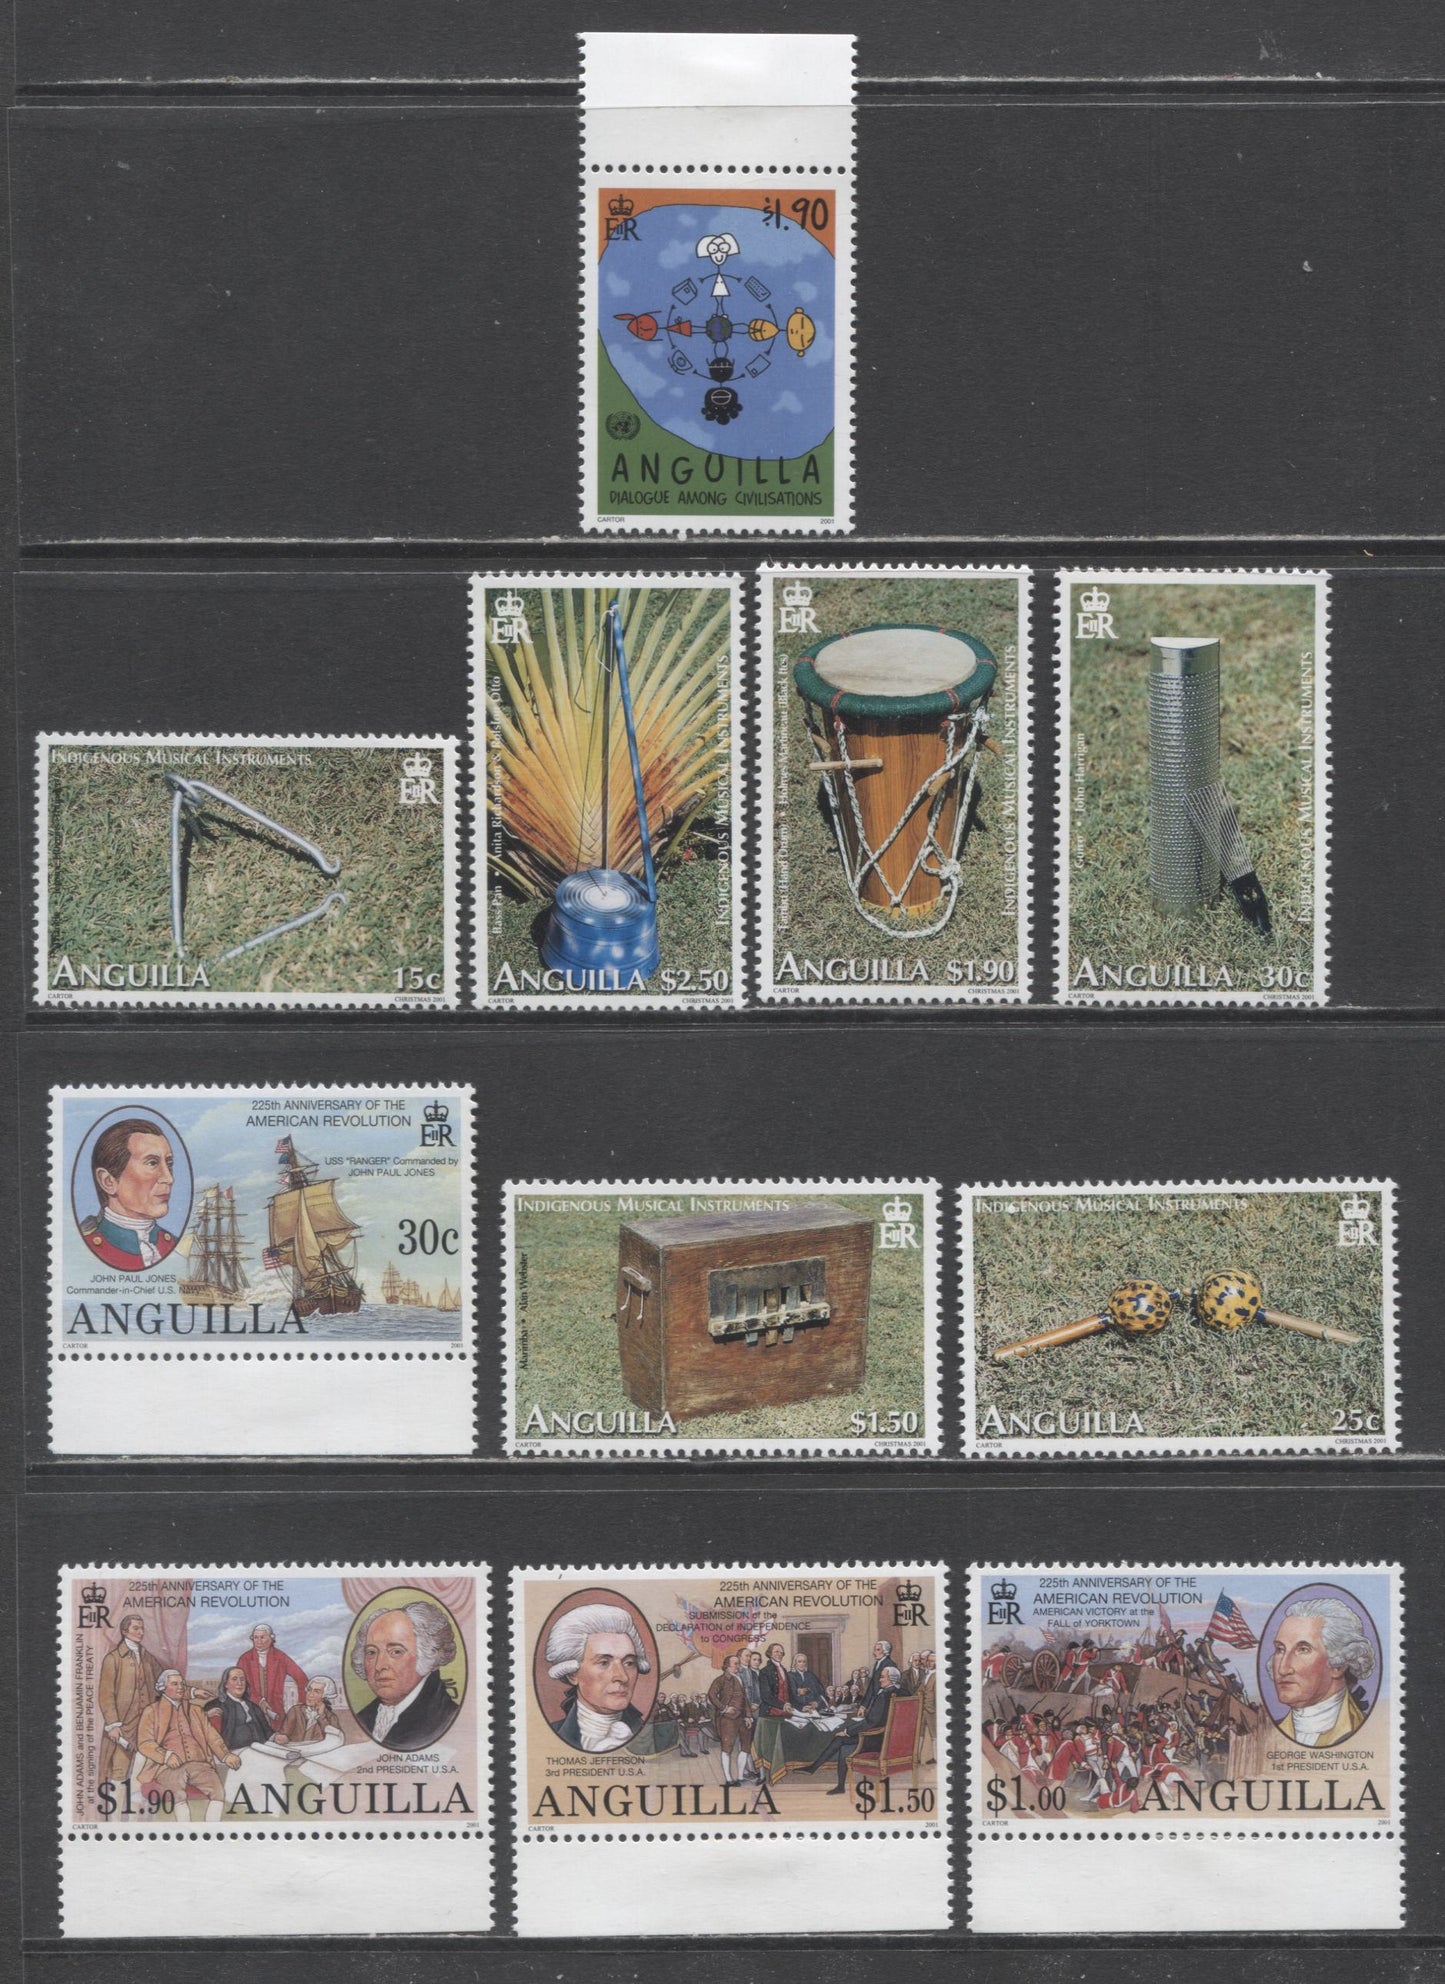 Lot 9 Anguilla SC#1049/1065 2001 American Revolution 225th Anniv, Year Of Dialogue & Christmas Issues, 11 VFNH Singles, Click on Listing to See ALL Pictures, 2017 Scott Cat. $18.5